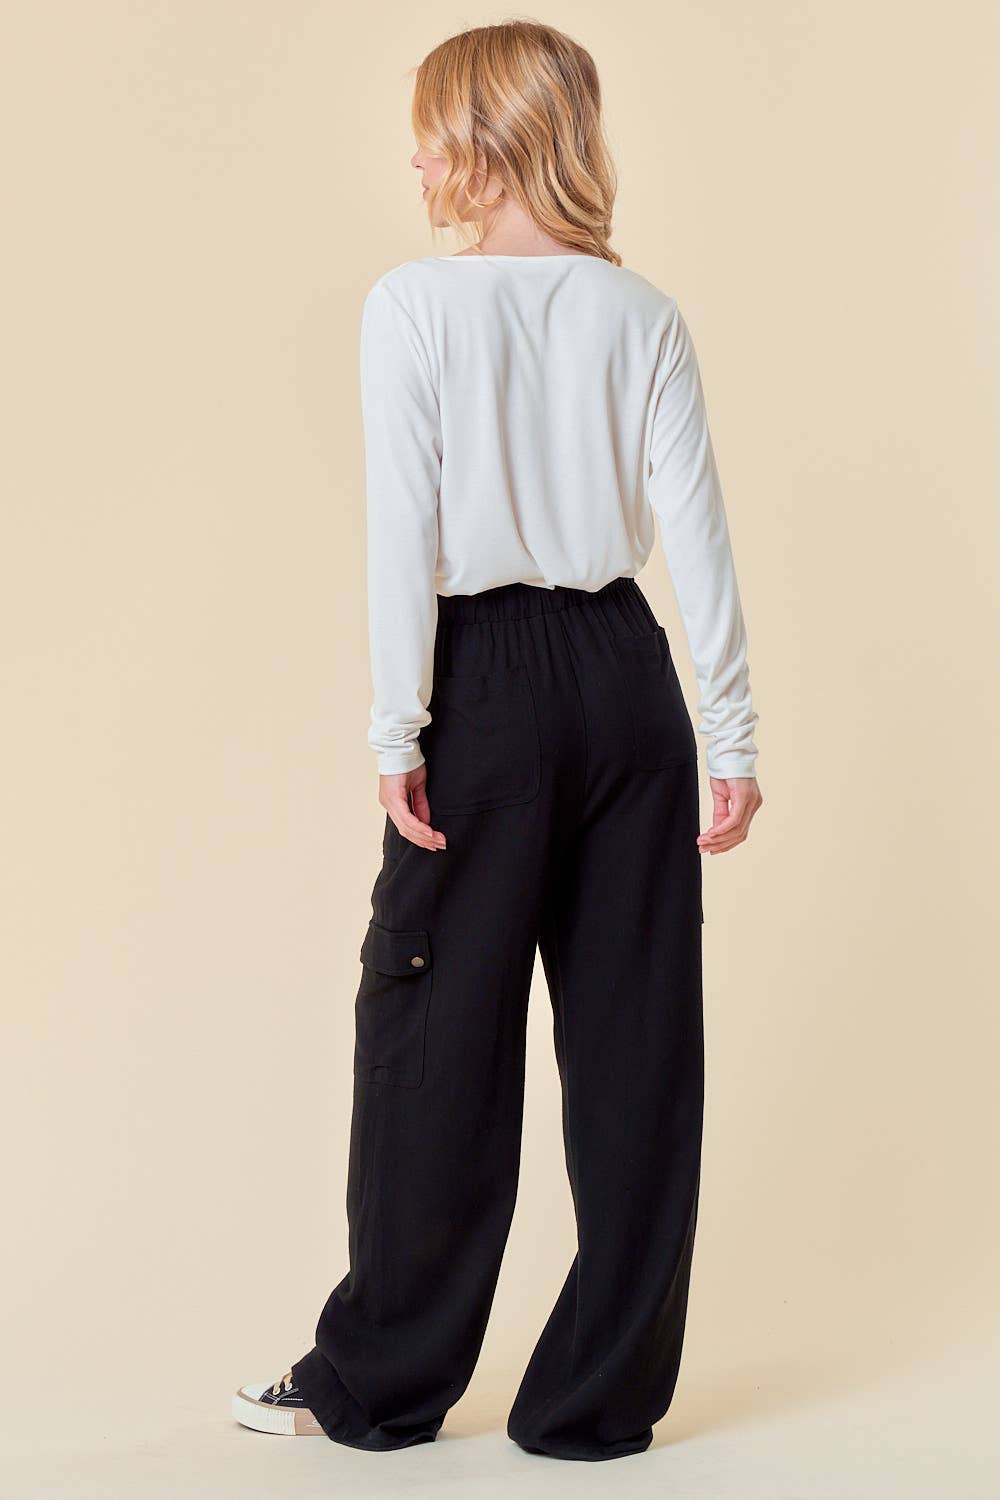 BLACK TIE FRONT PANTS WITH CARGO POCKETS